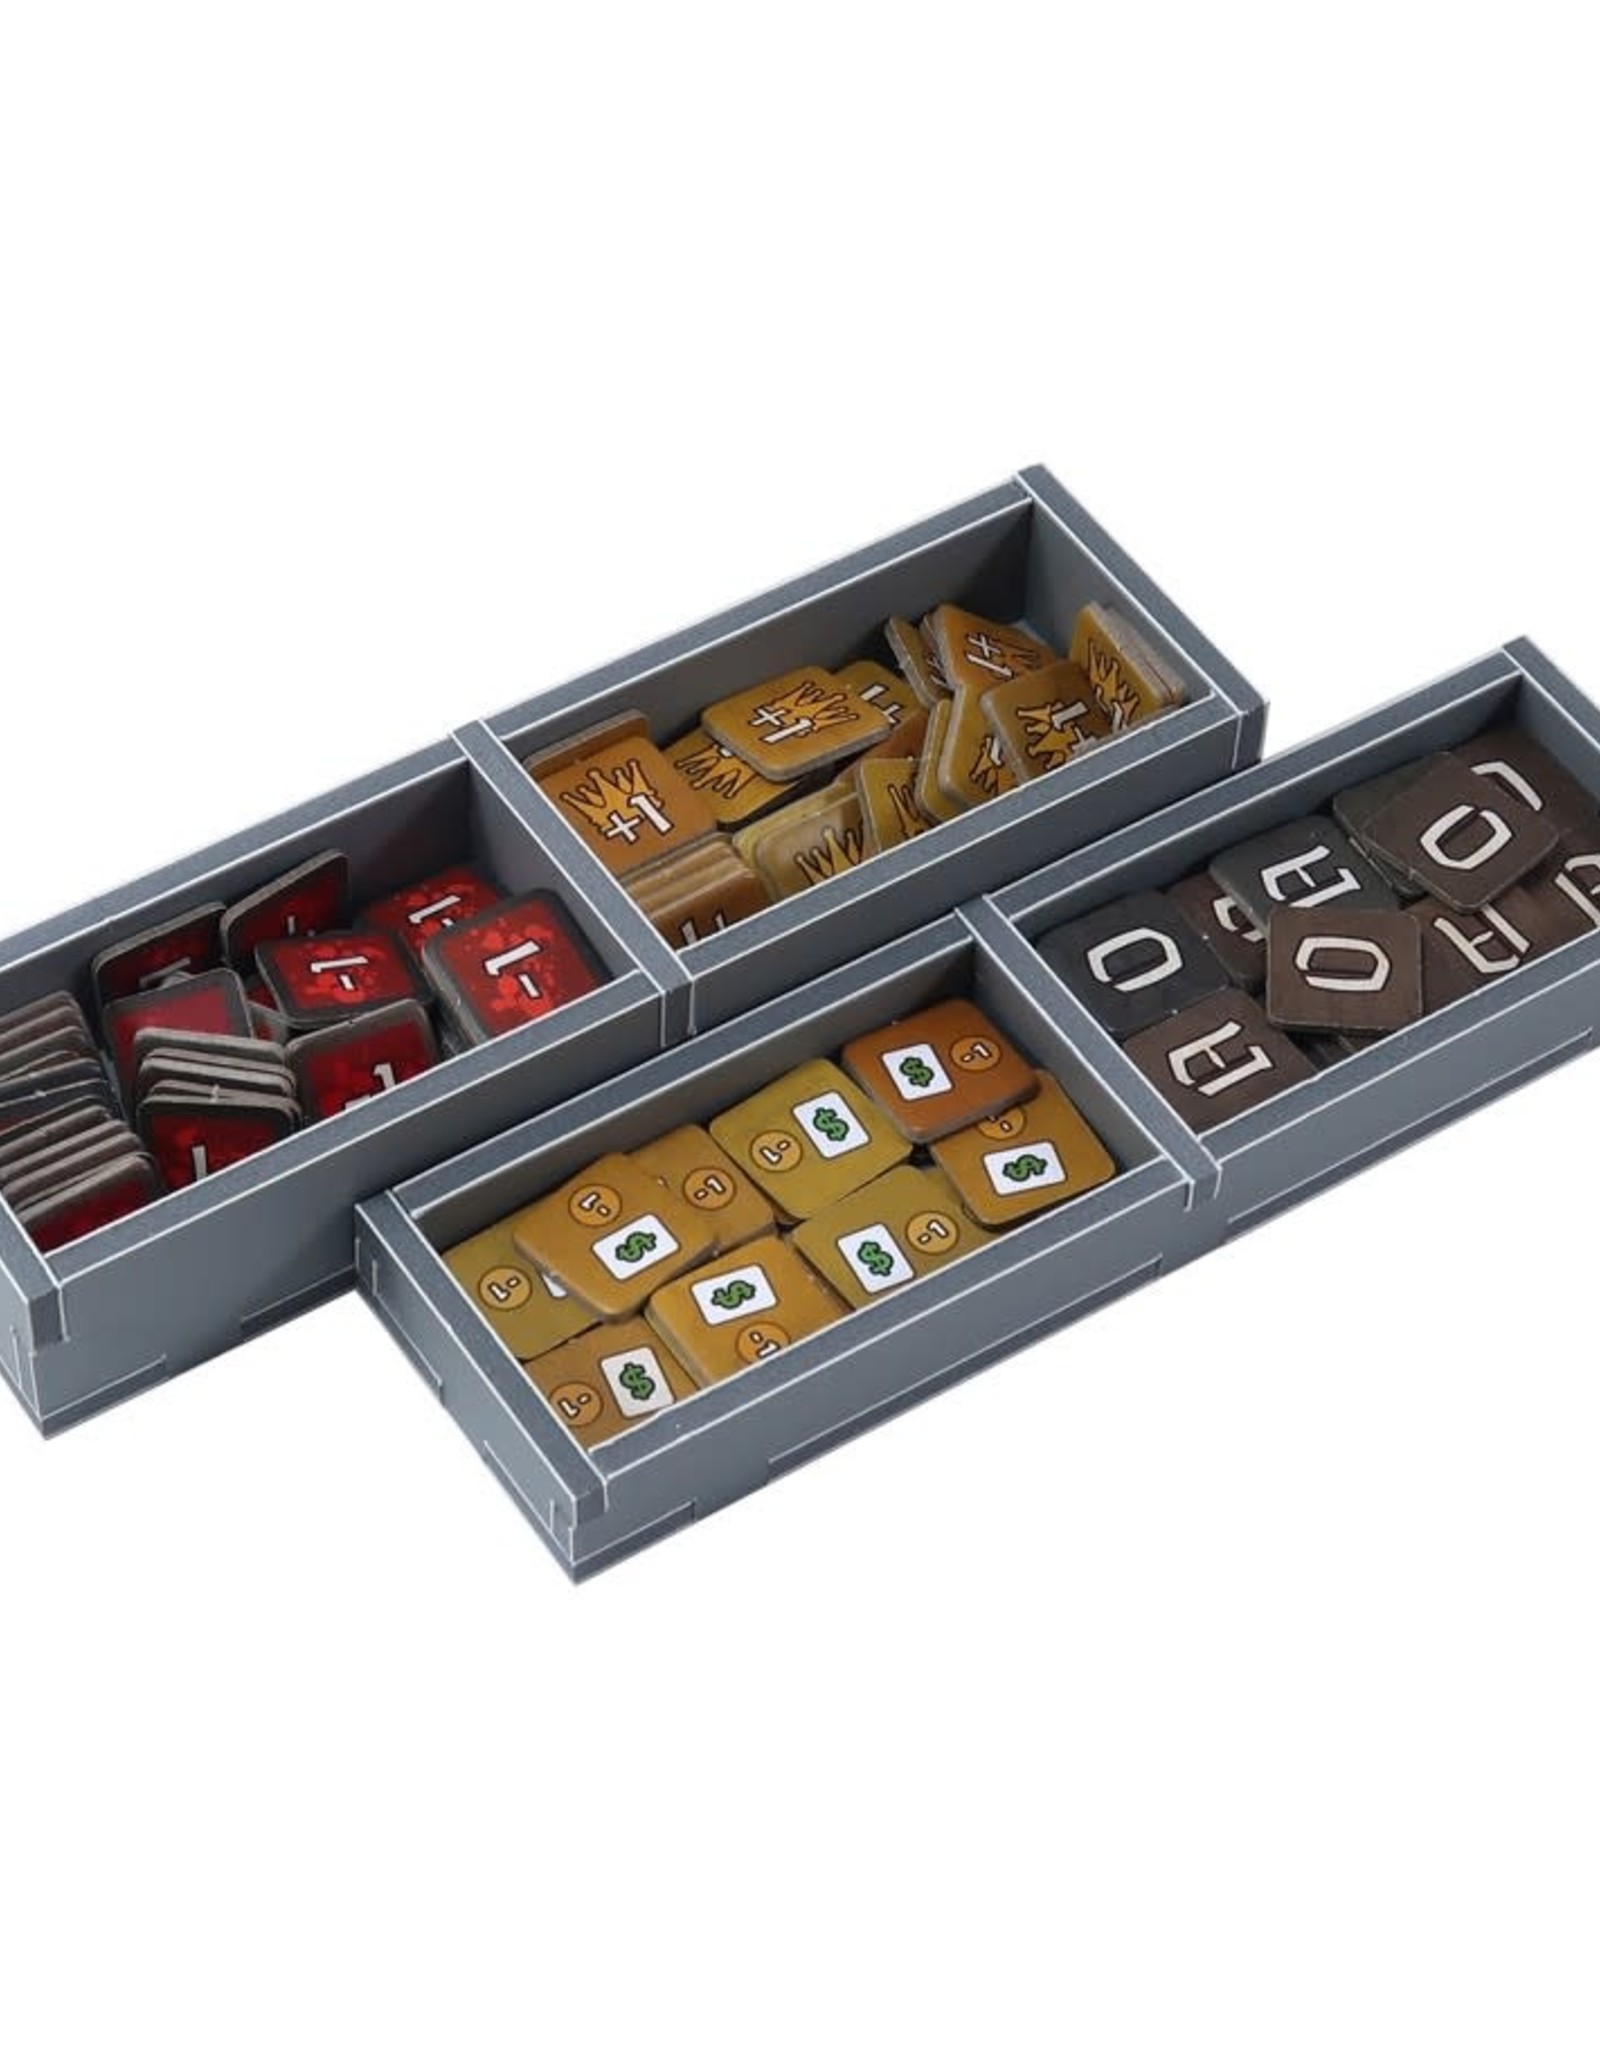 Folded Space Box Insert: Roll Player and Expansions